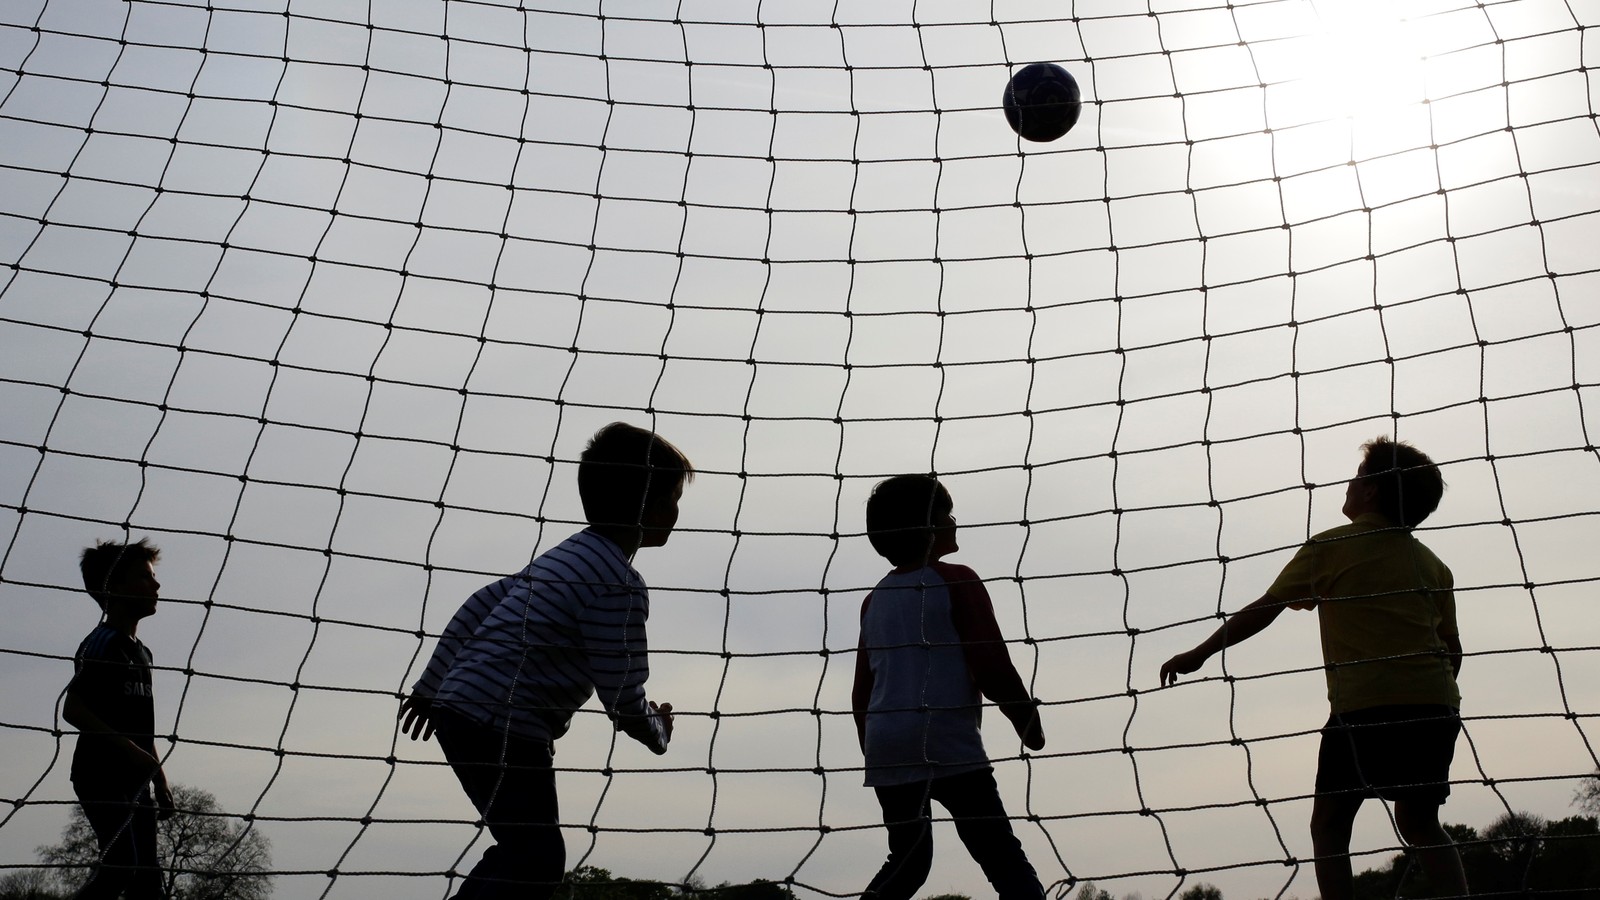 Why some Schools are Encouraging Dangerous Free Play at Recess